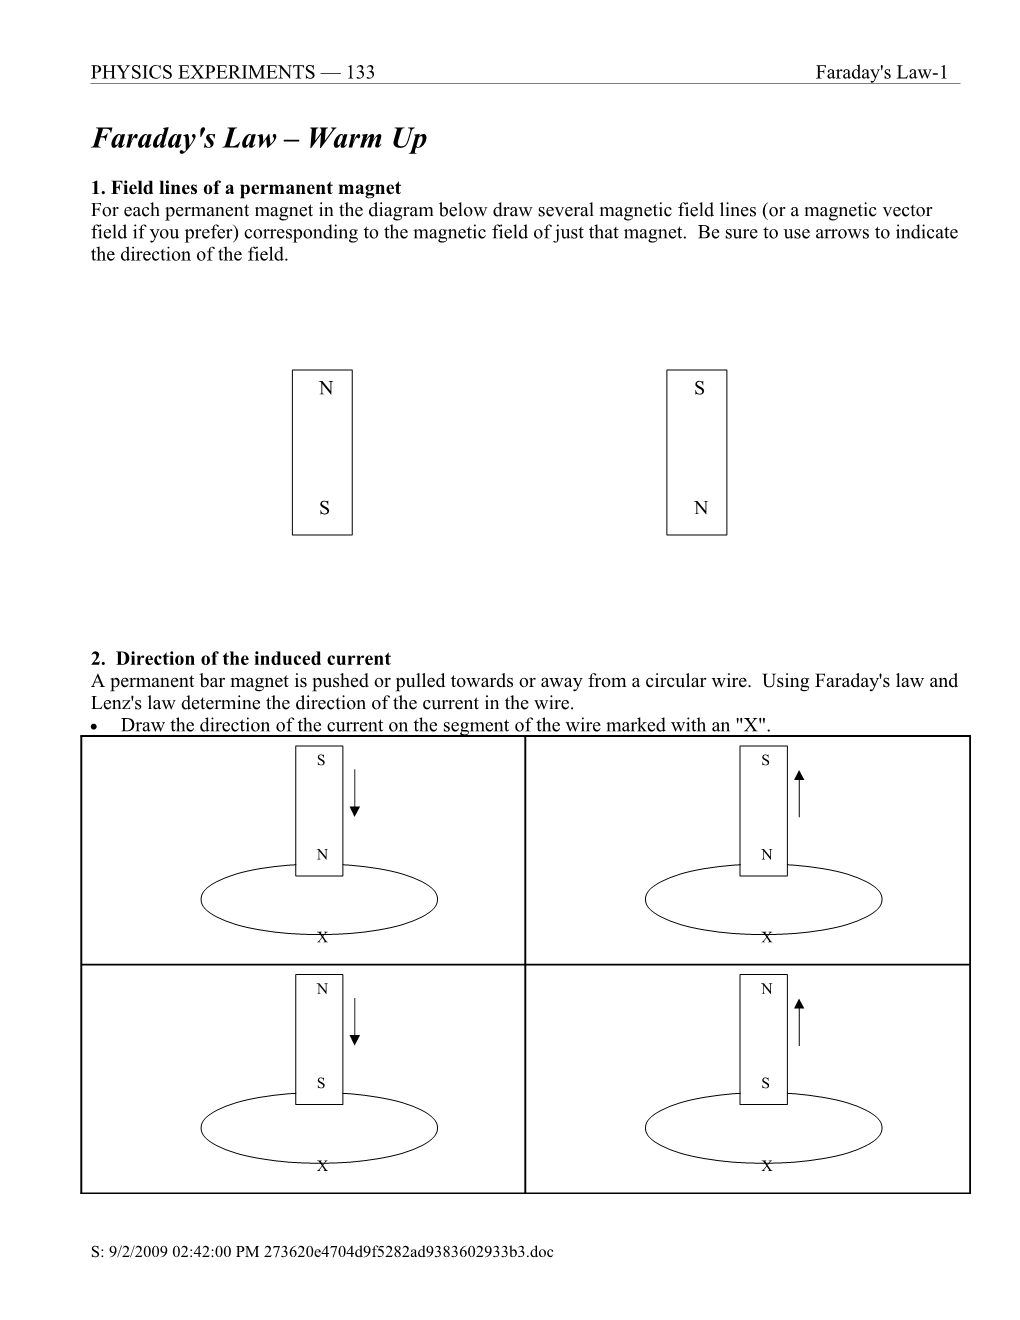 1. Field Lines of a Permanent Magnet